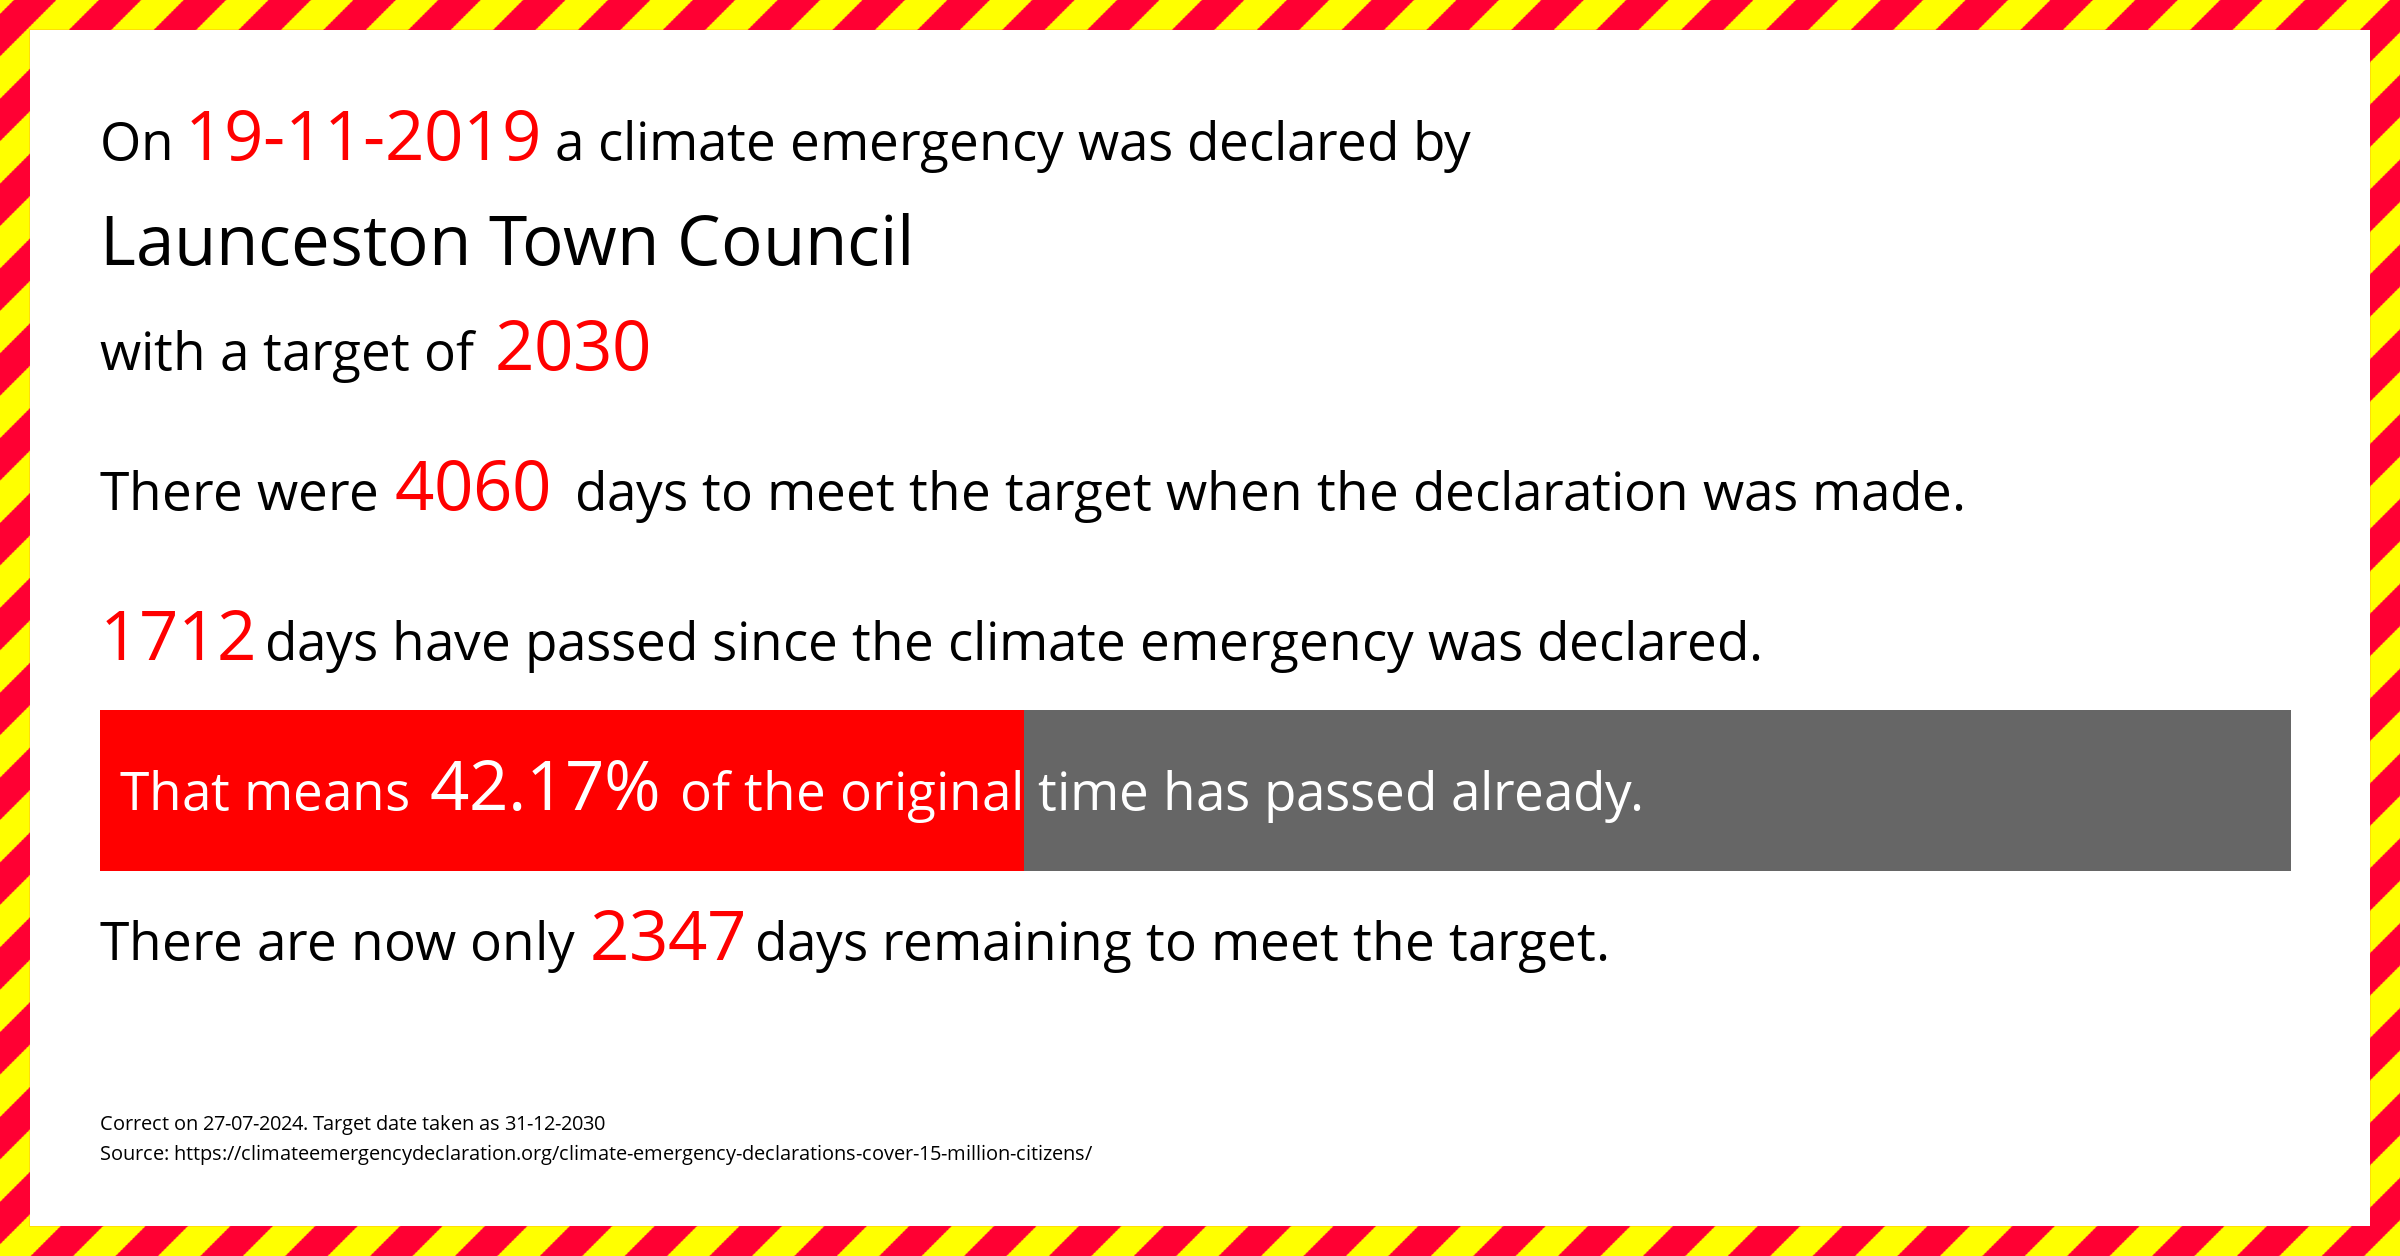 Launceston Town Council declared a Climate emergency on Tuesday 19th November 2019, with a target of 2030.